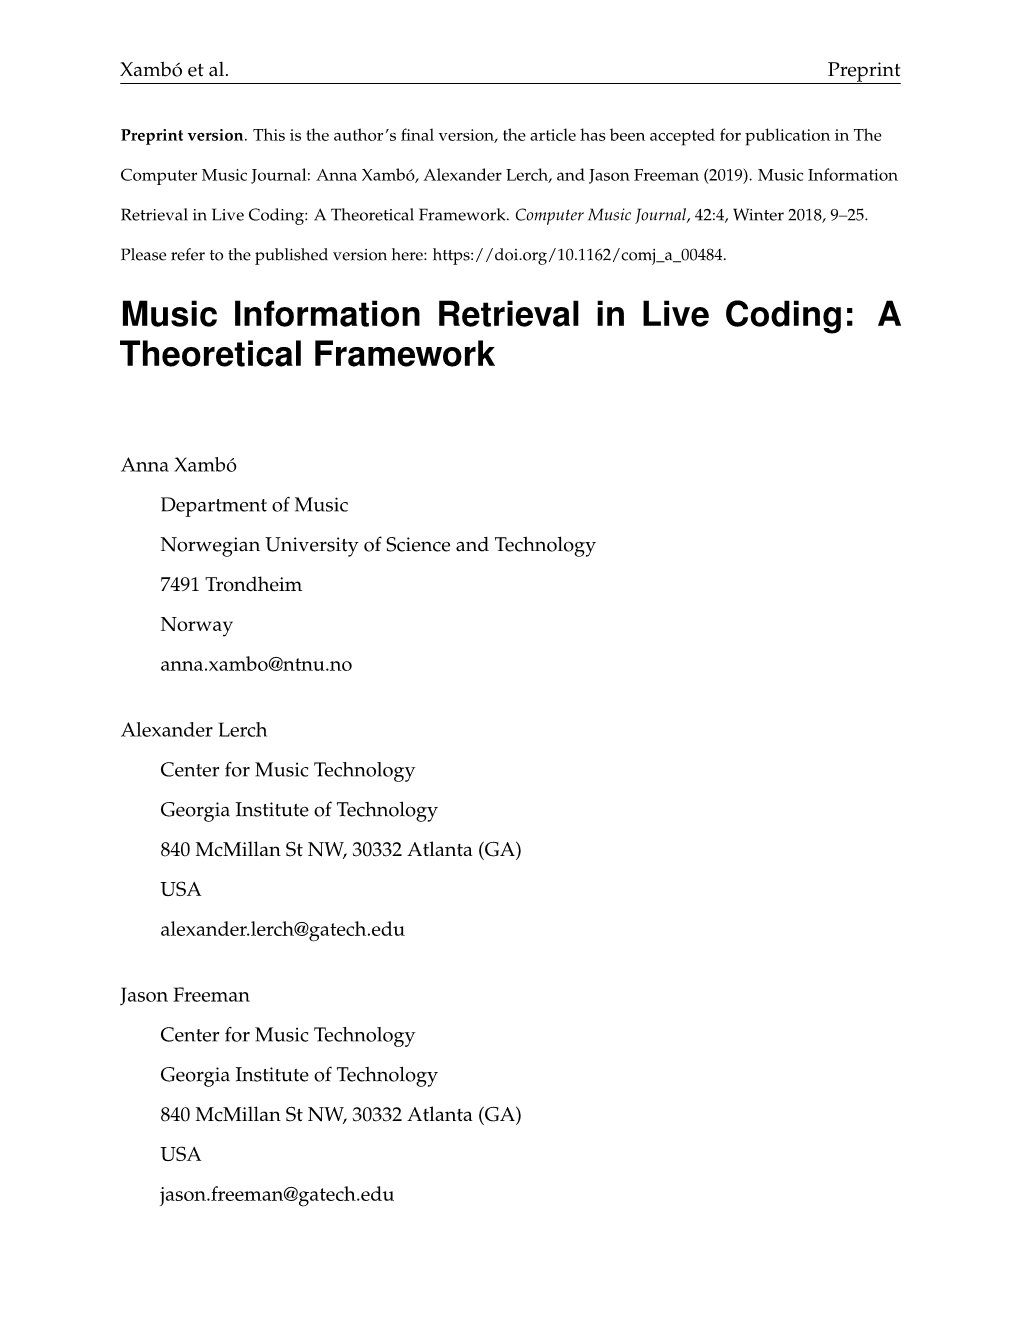 Music Information Retrieval in Live Coding: a Theoretical Framework